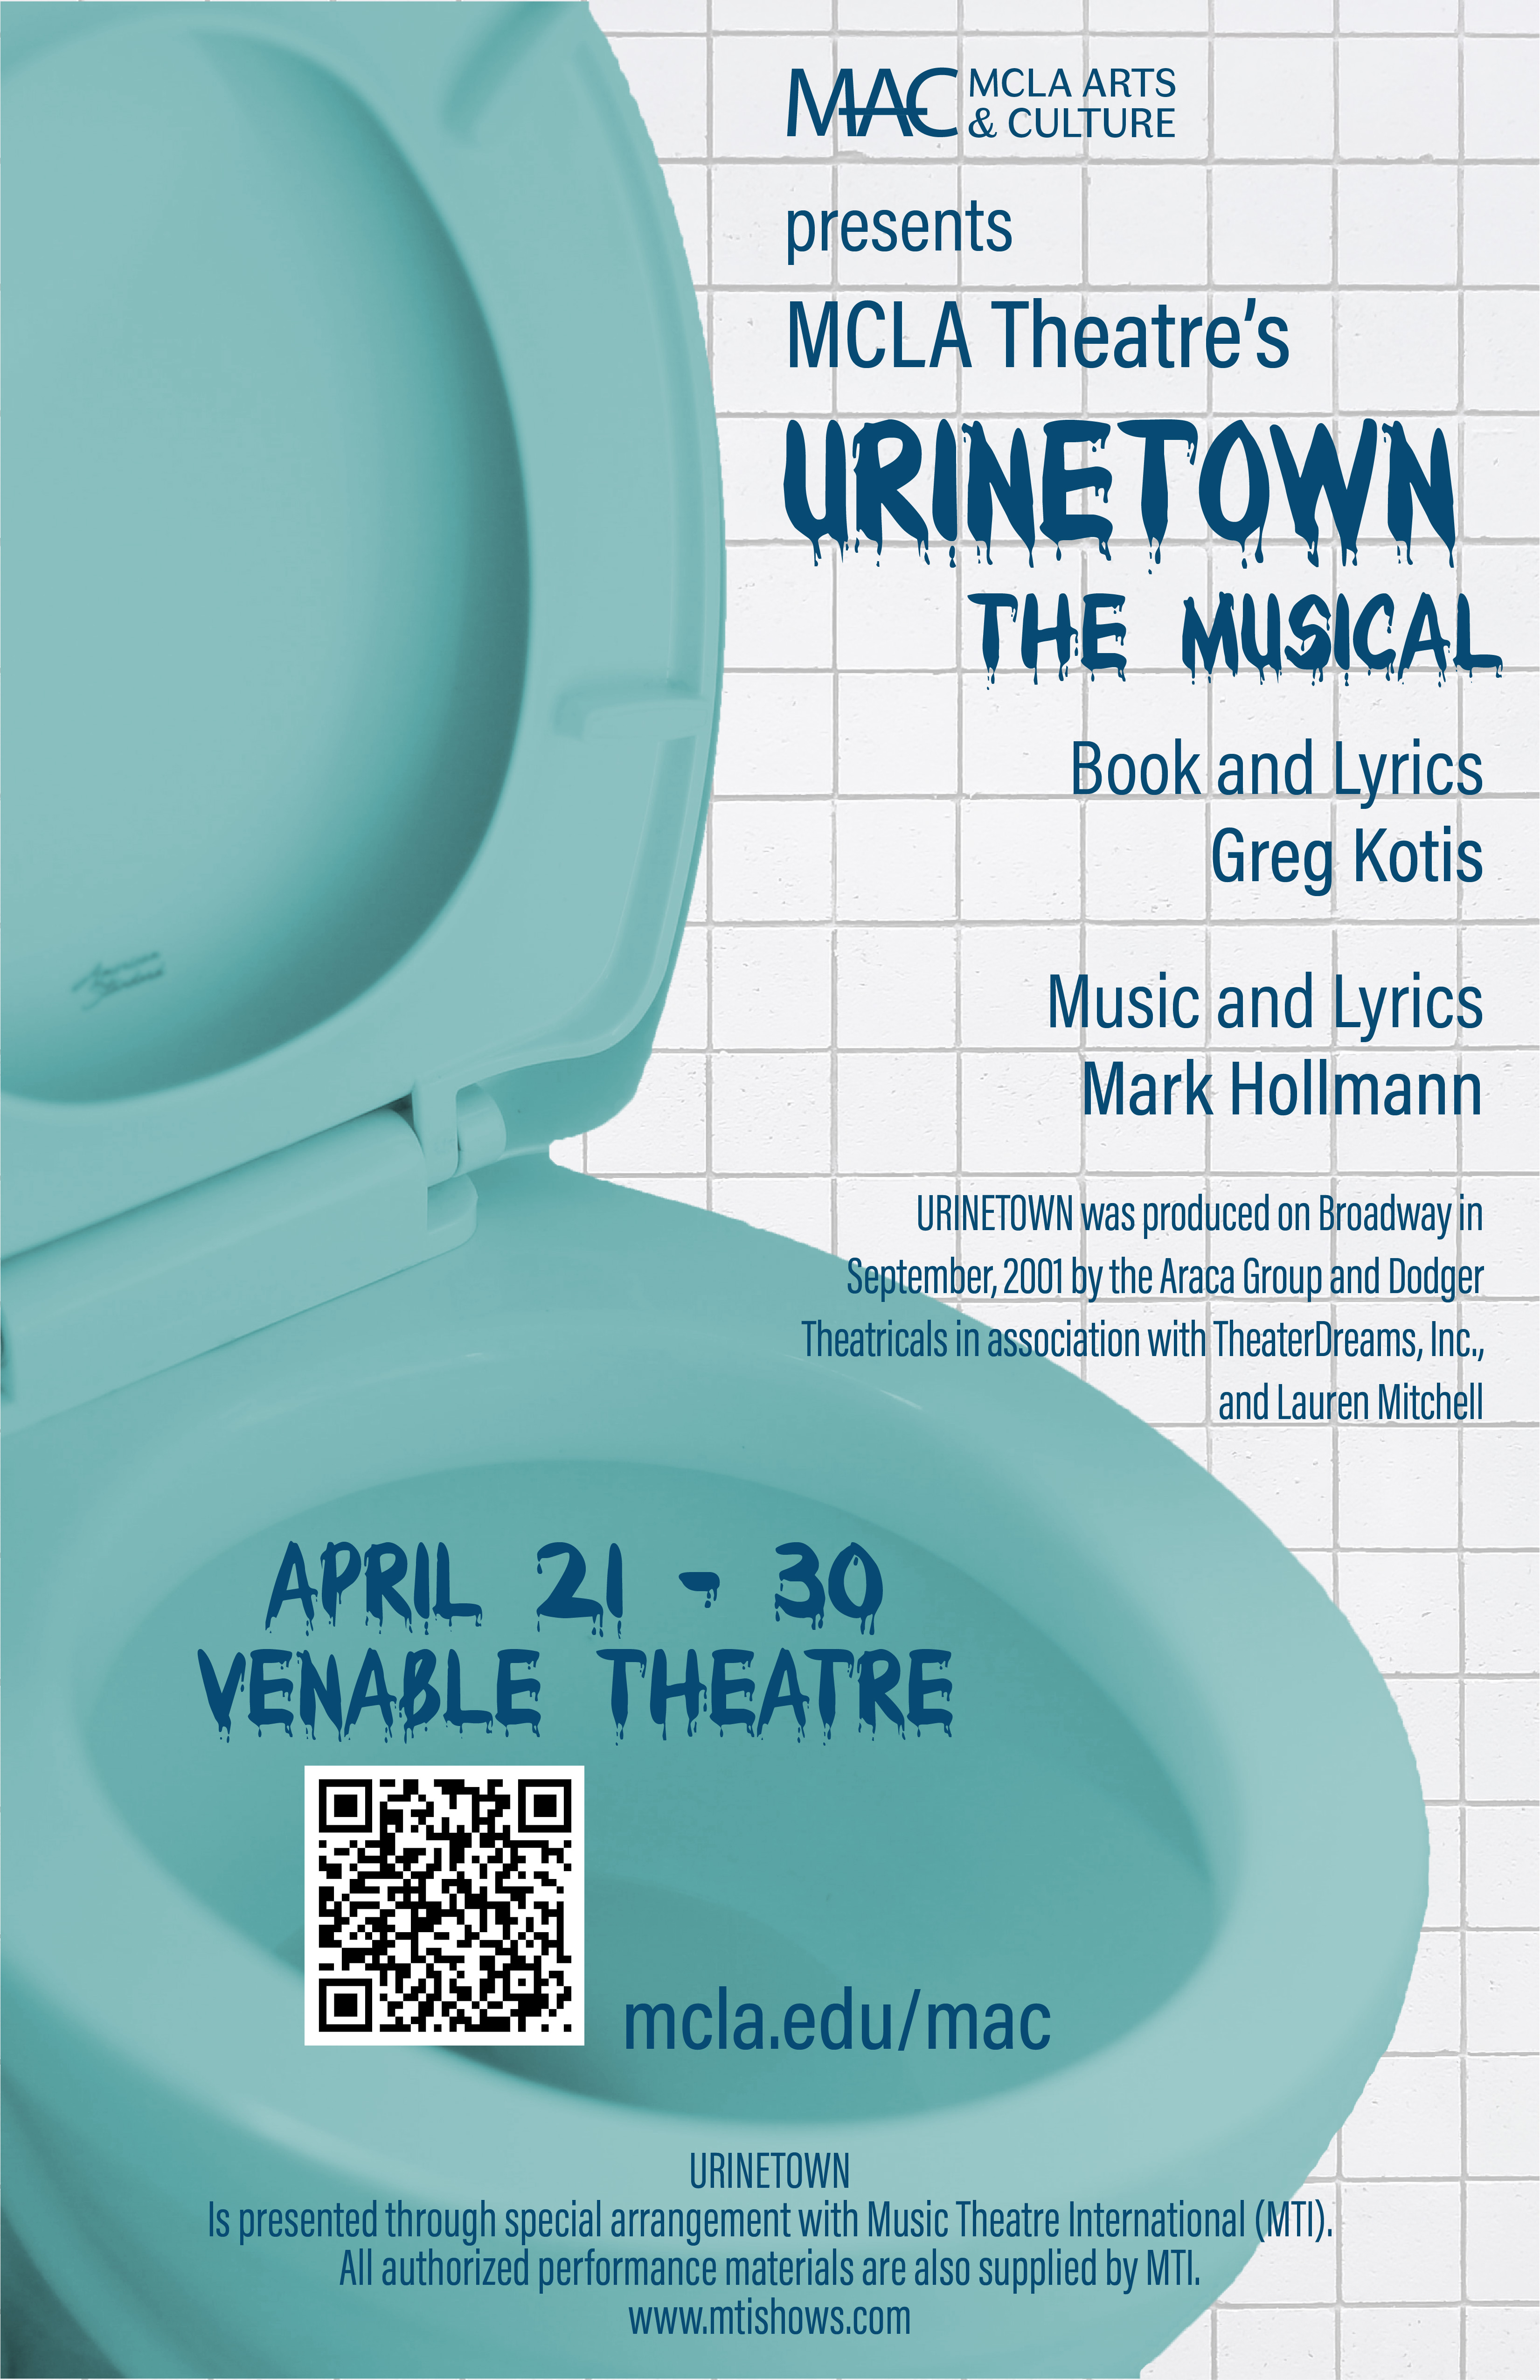 Poster for MCLA Theatre's Urinetown